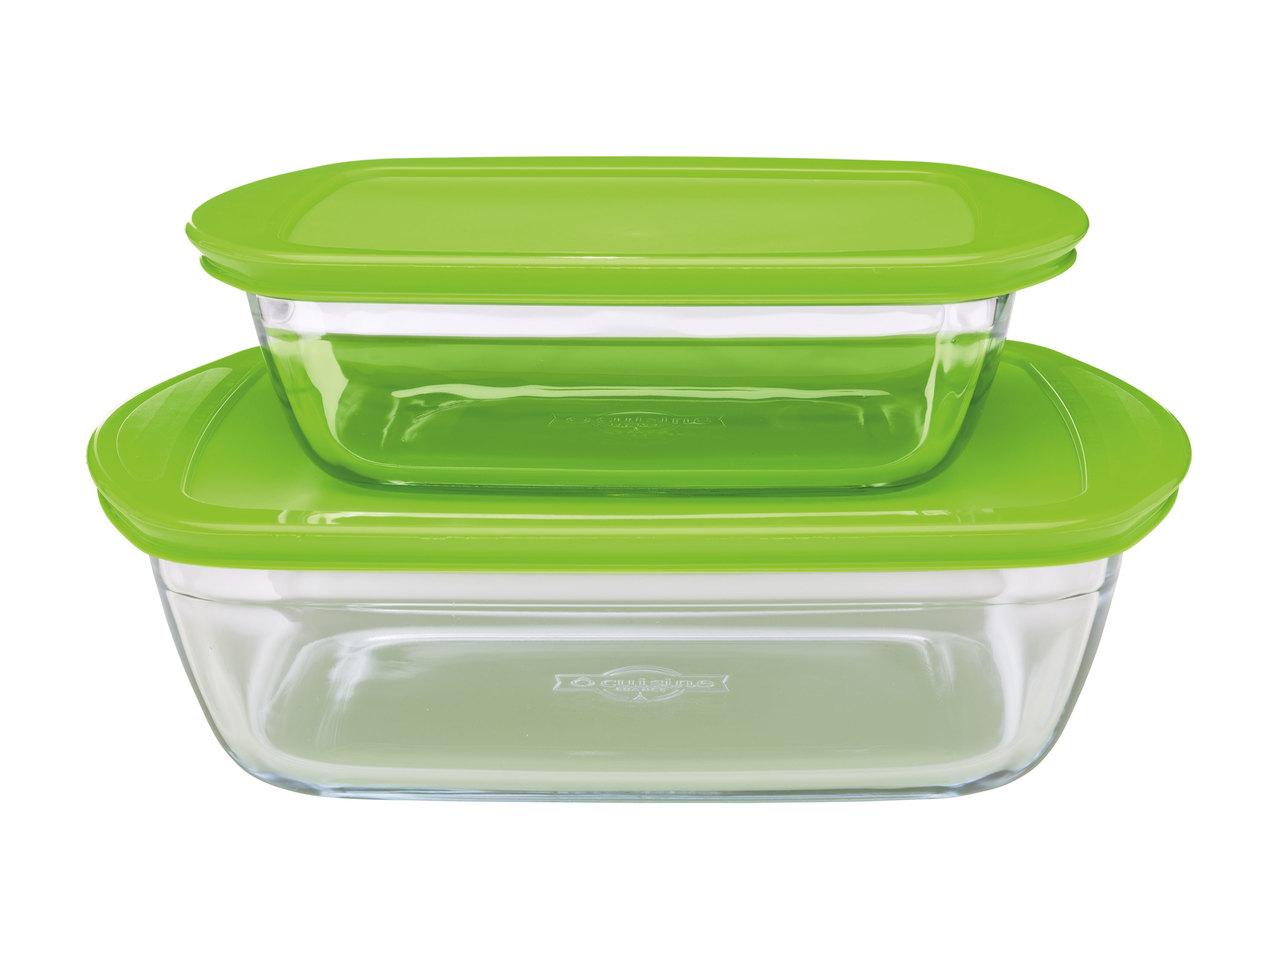 O Cuisine Dishes with Lids1